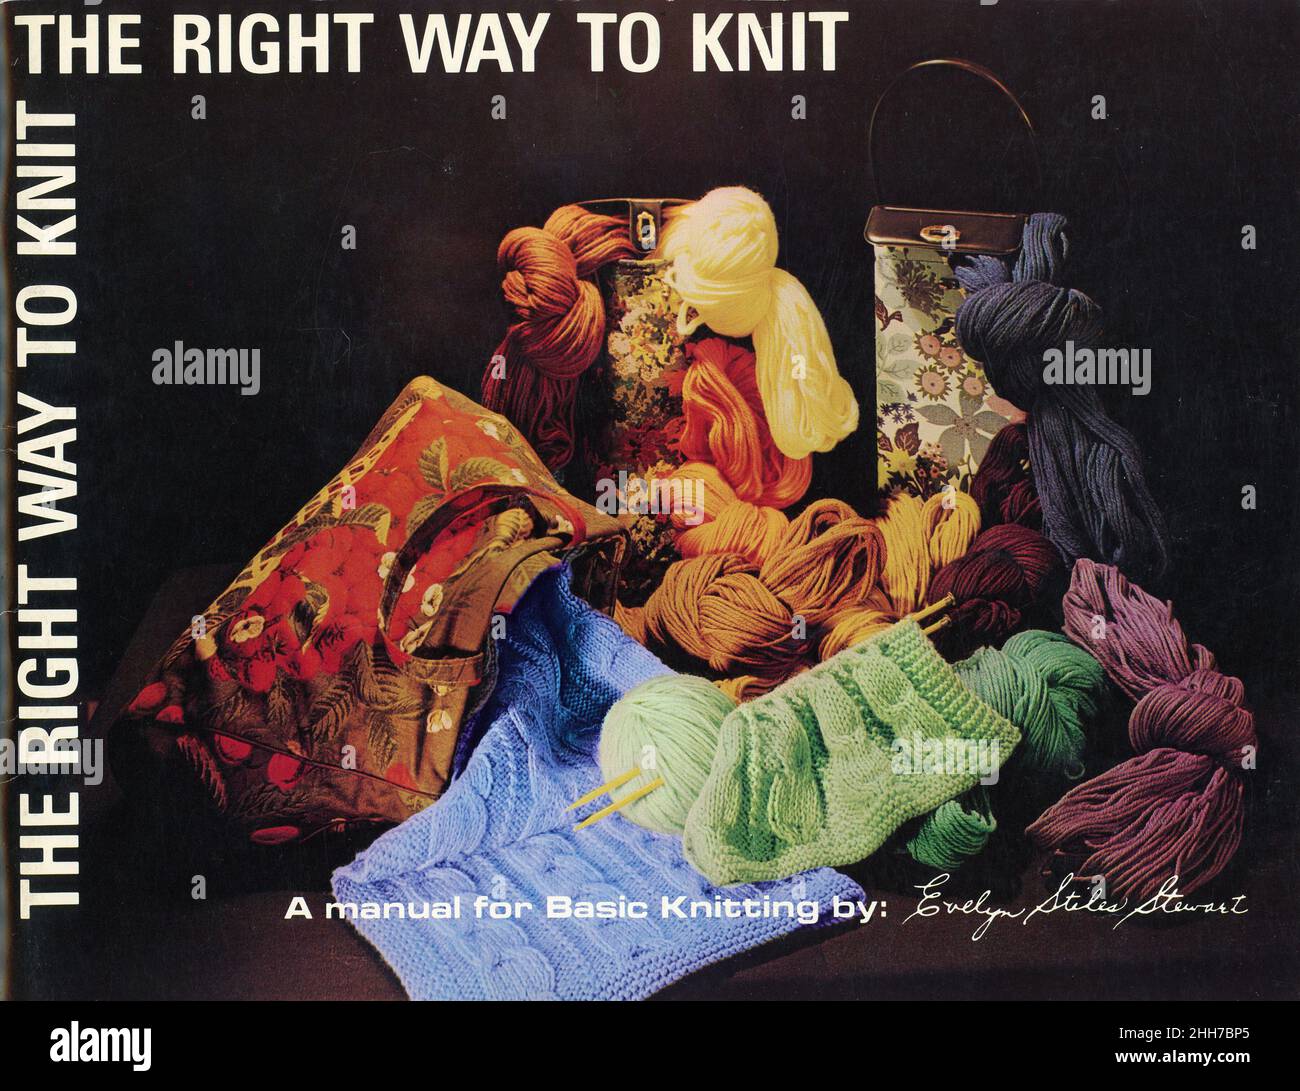 Vintage 'The Right Way to Knit' instruction book, USA  1967 Stock Photo